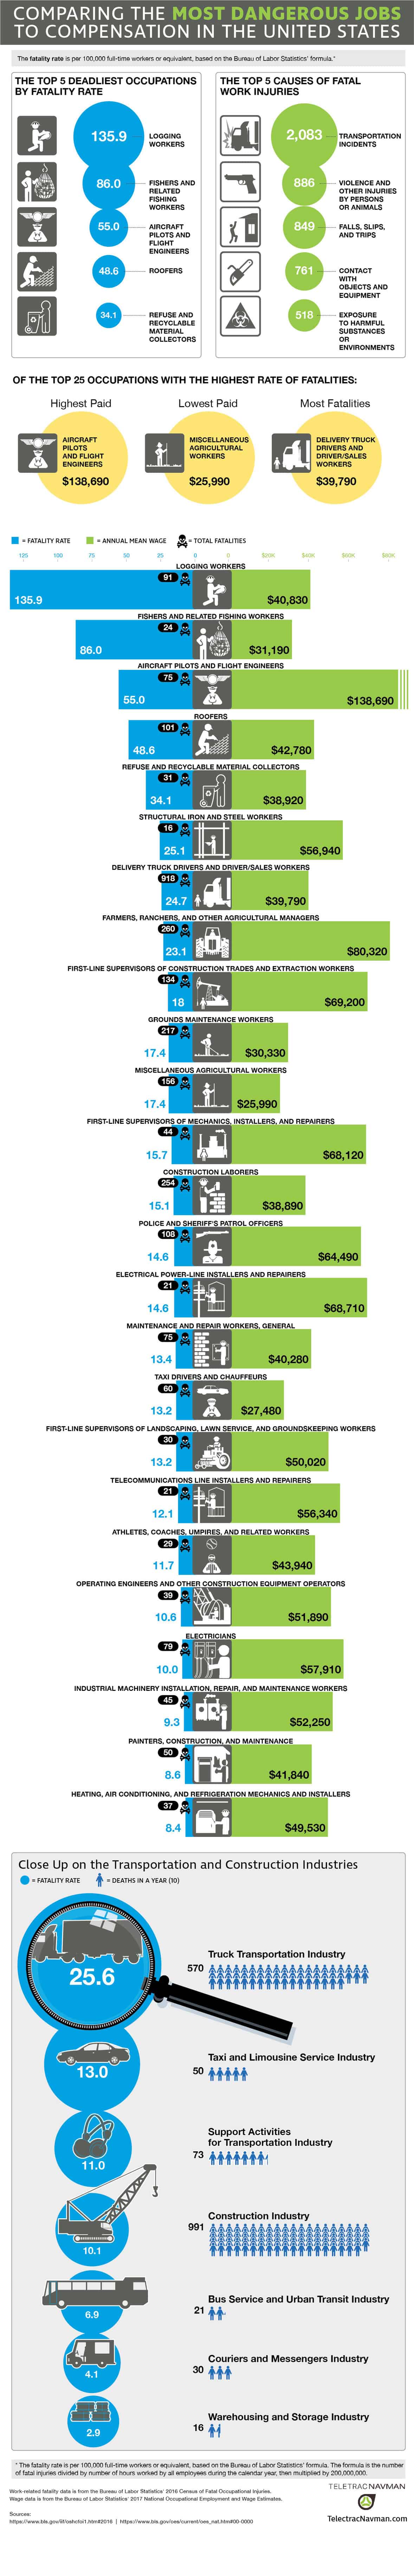 Comparing Most Dangerous Jobs Compensation United States